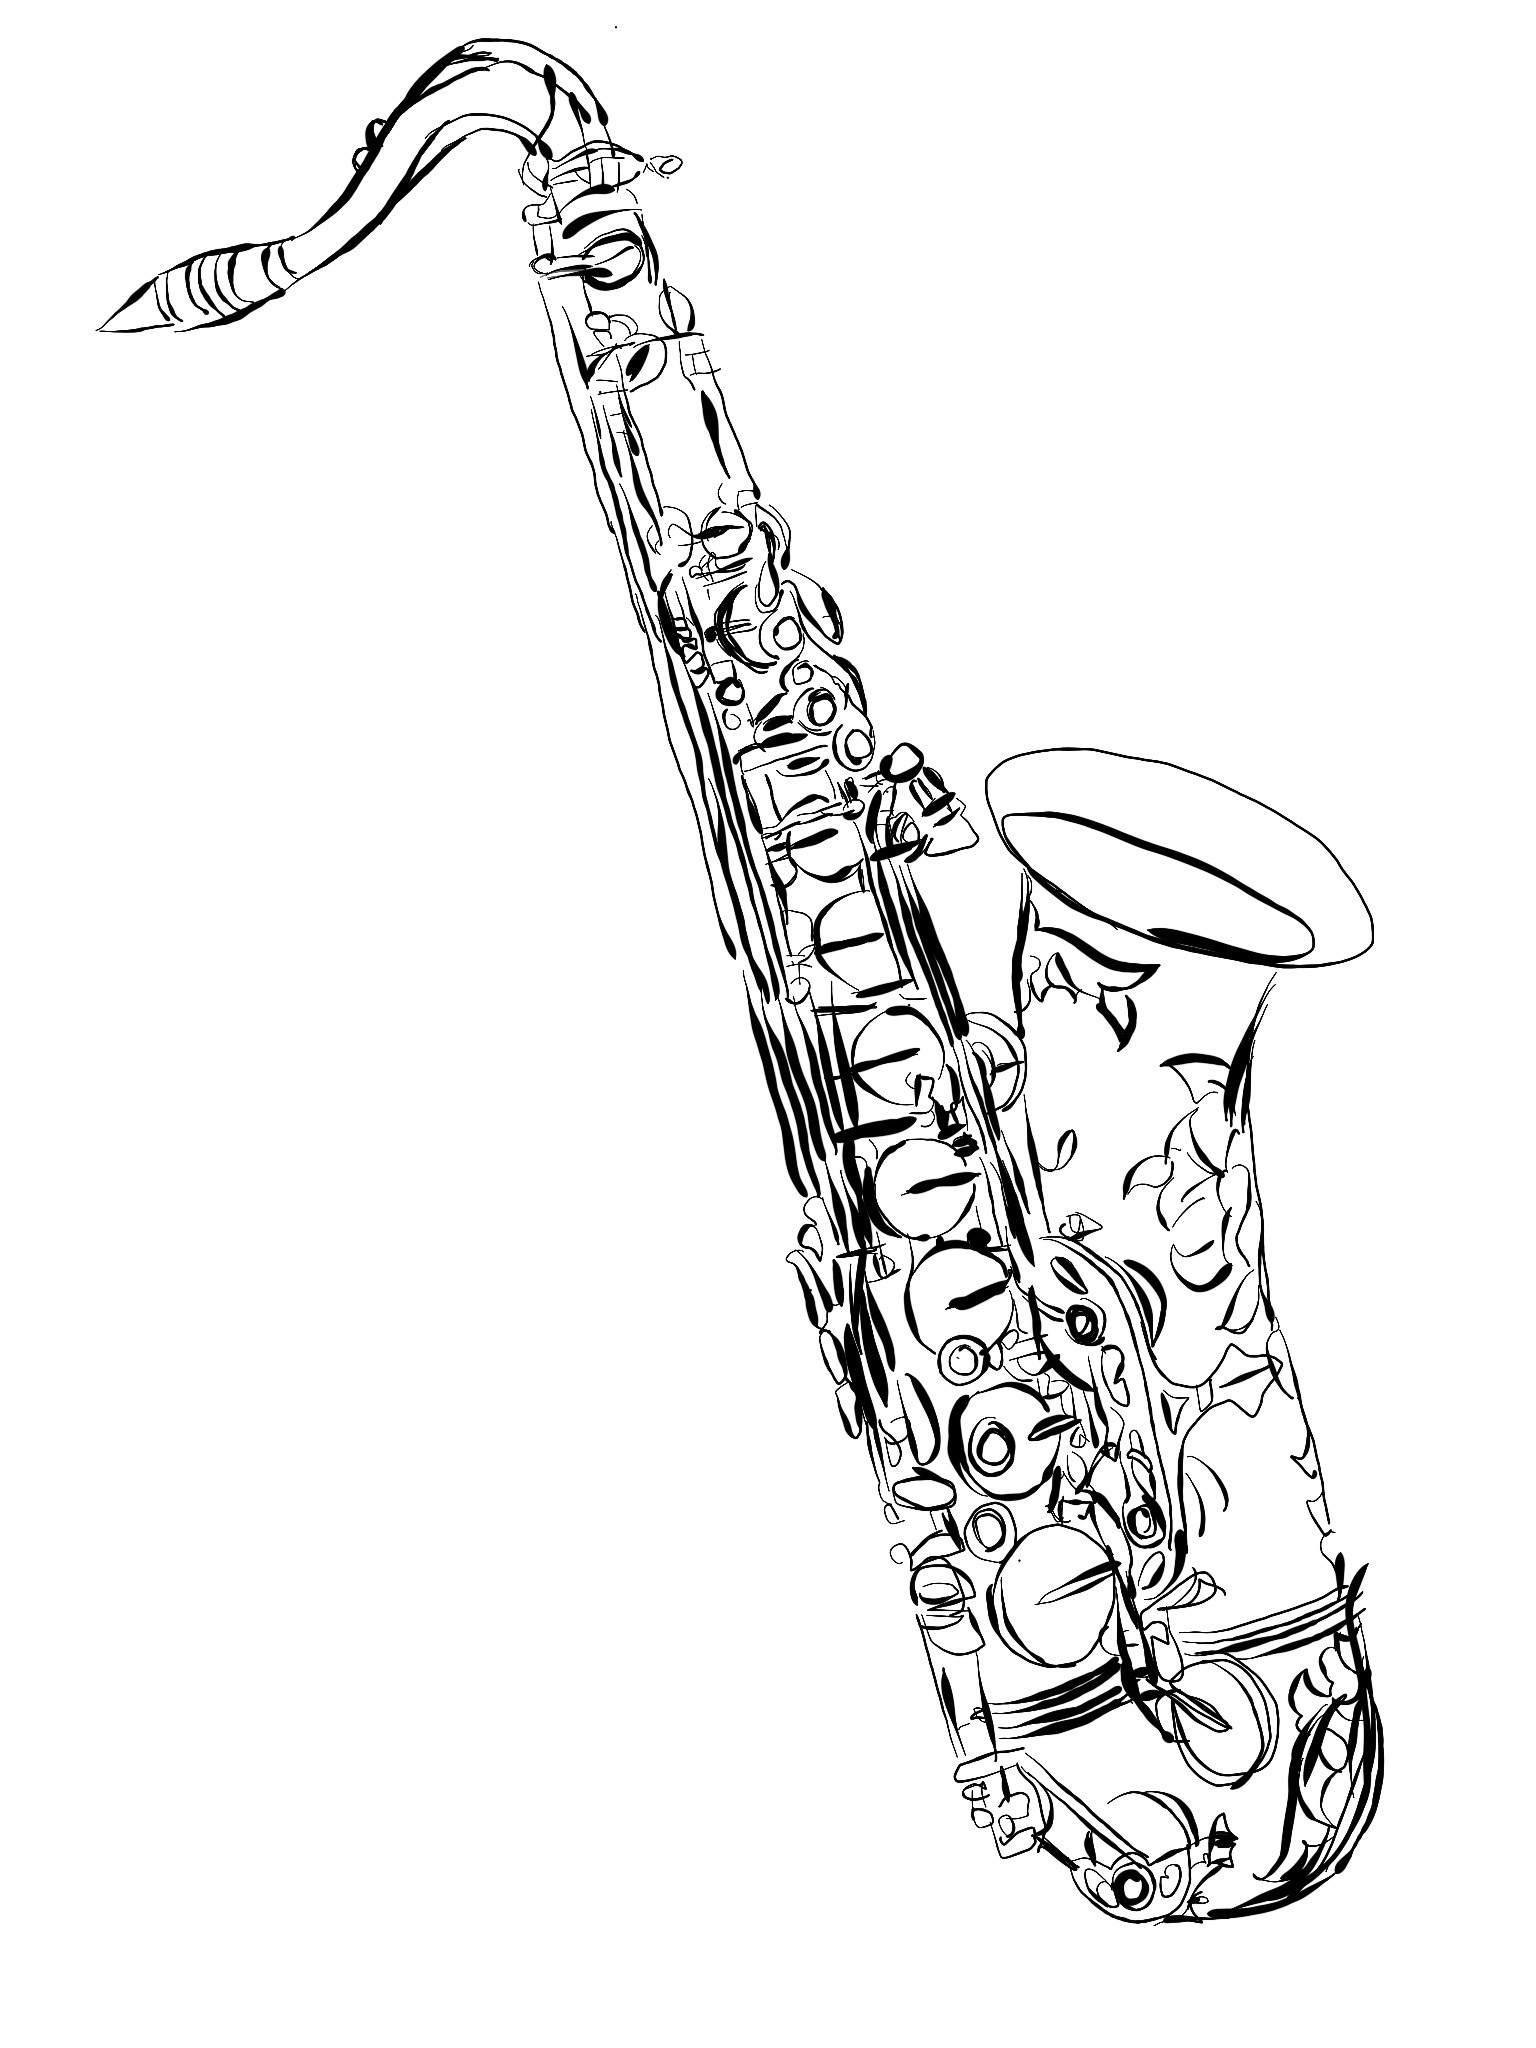 The Best Free Sax Drawing Images Download From 83 Free Drawings Of Sax At Getdrawings